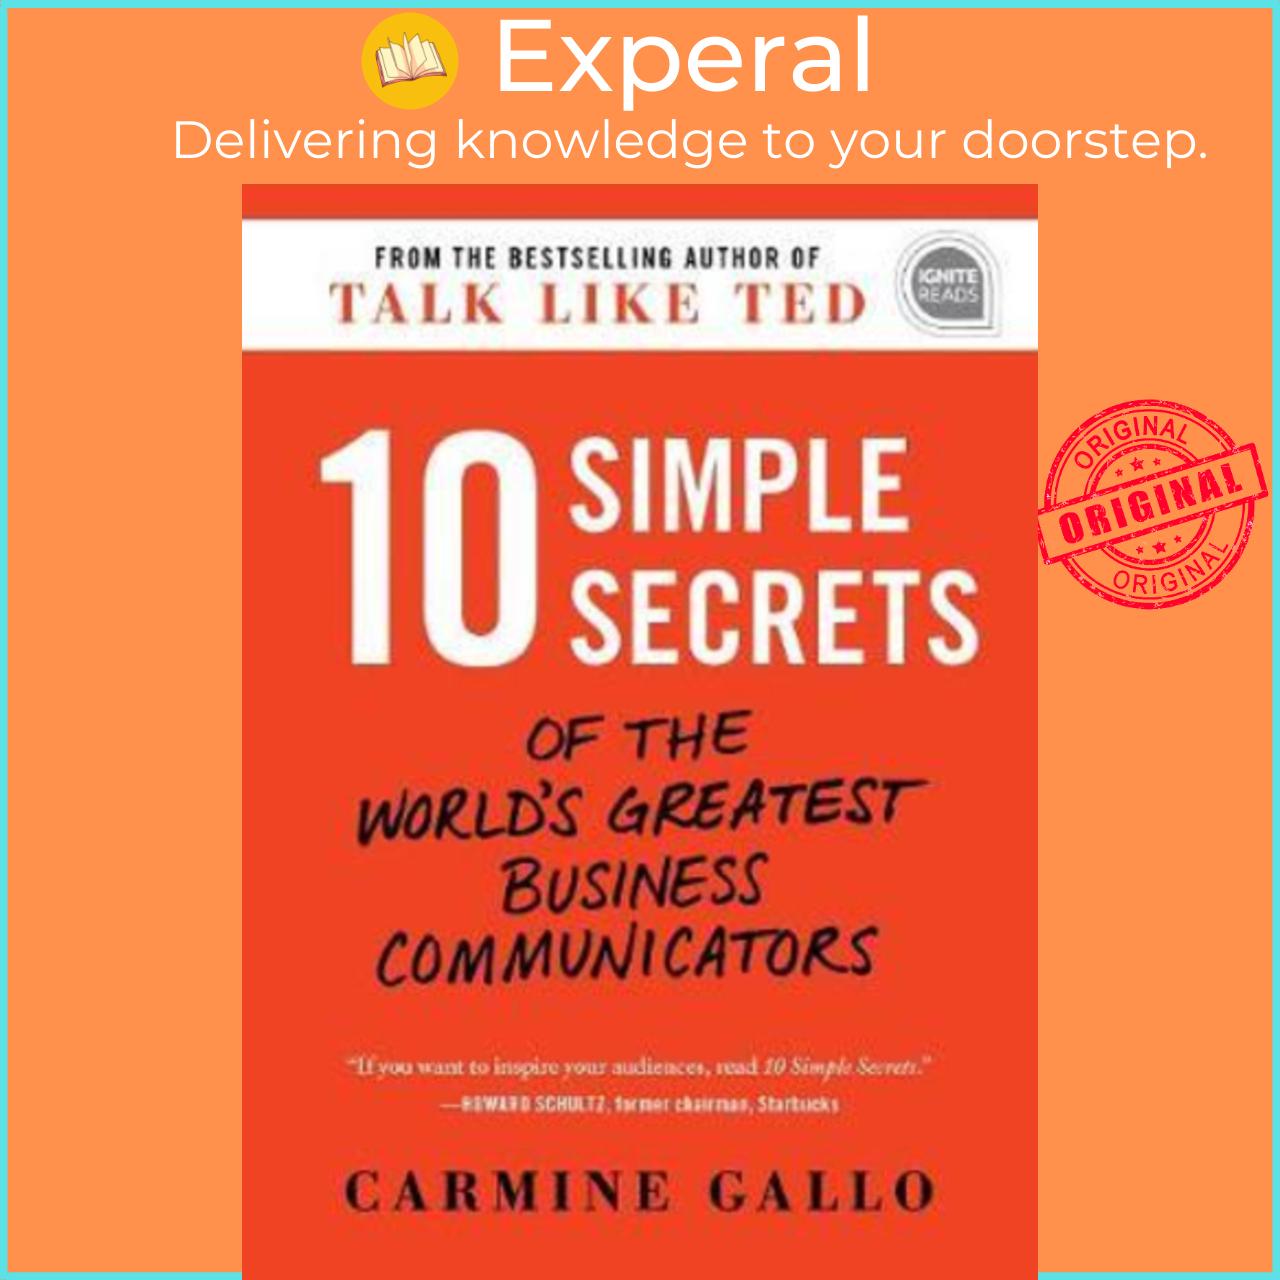 Hình ảnh Sách - 10 Simple Secrets of the World's Greatest Business Communicators by Carmine Gallo (US edition, hardcover)